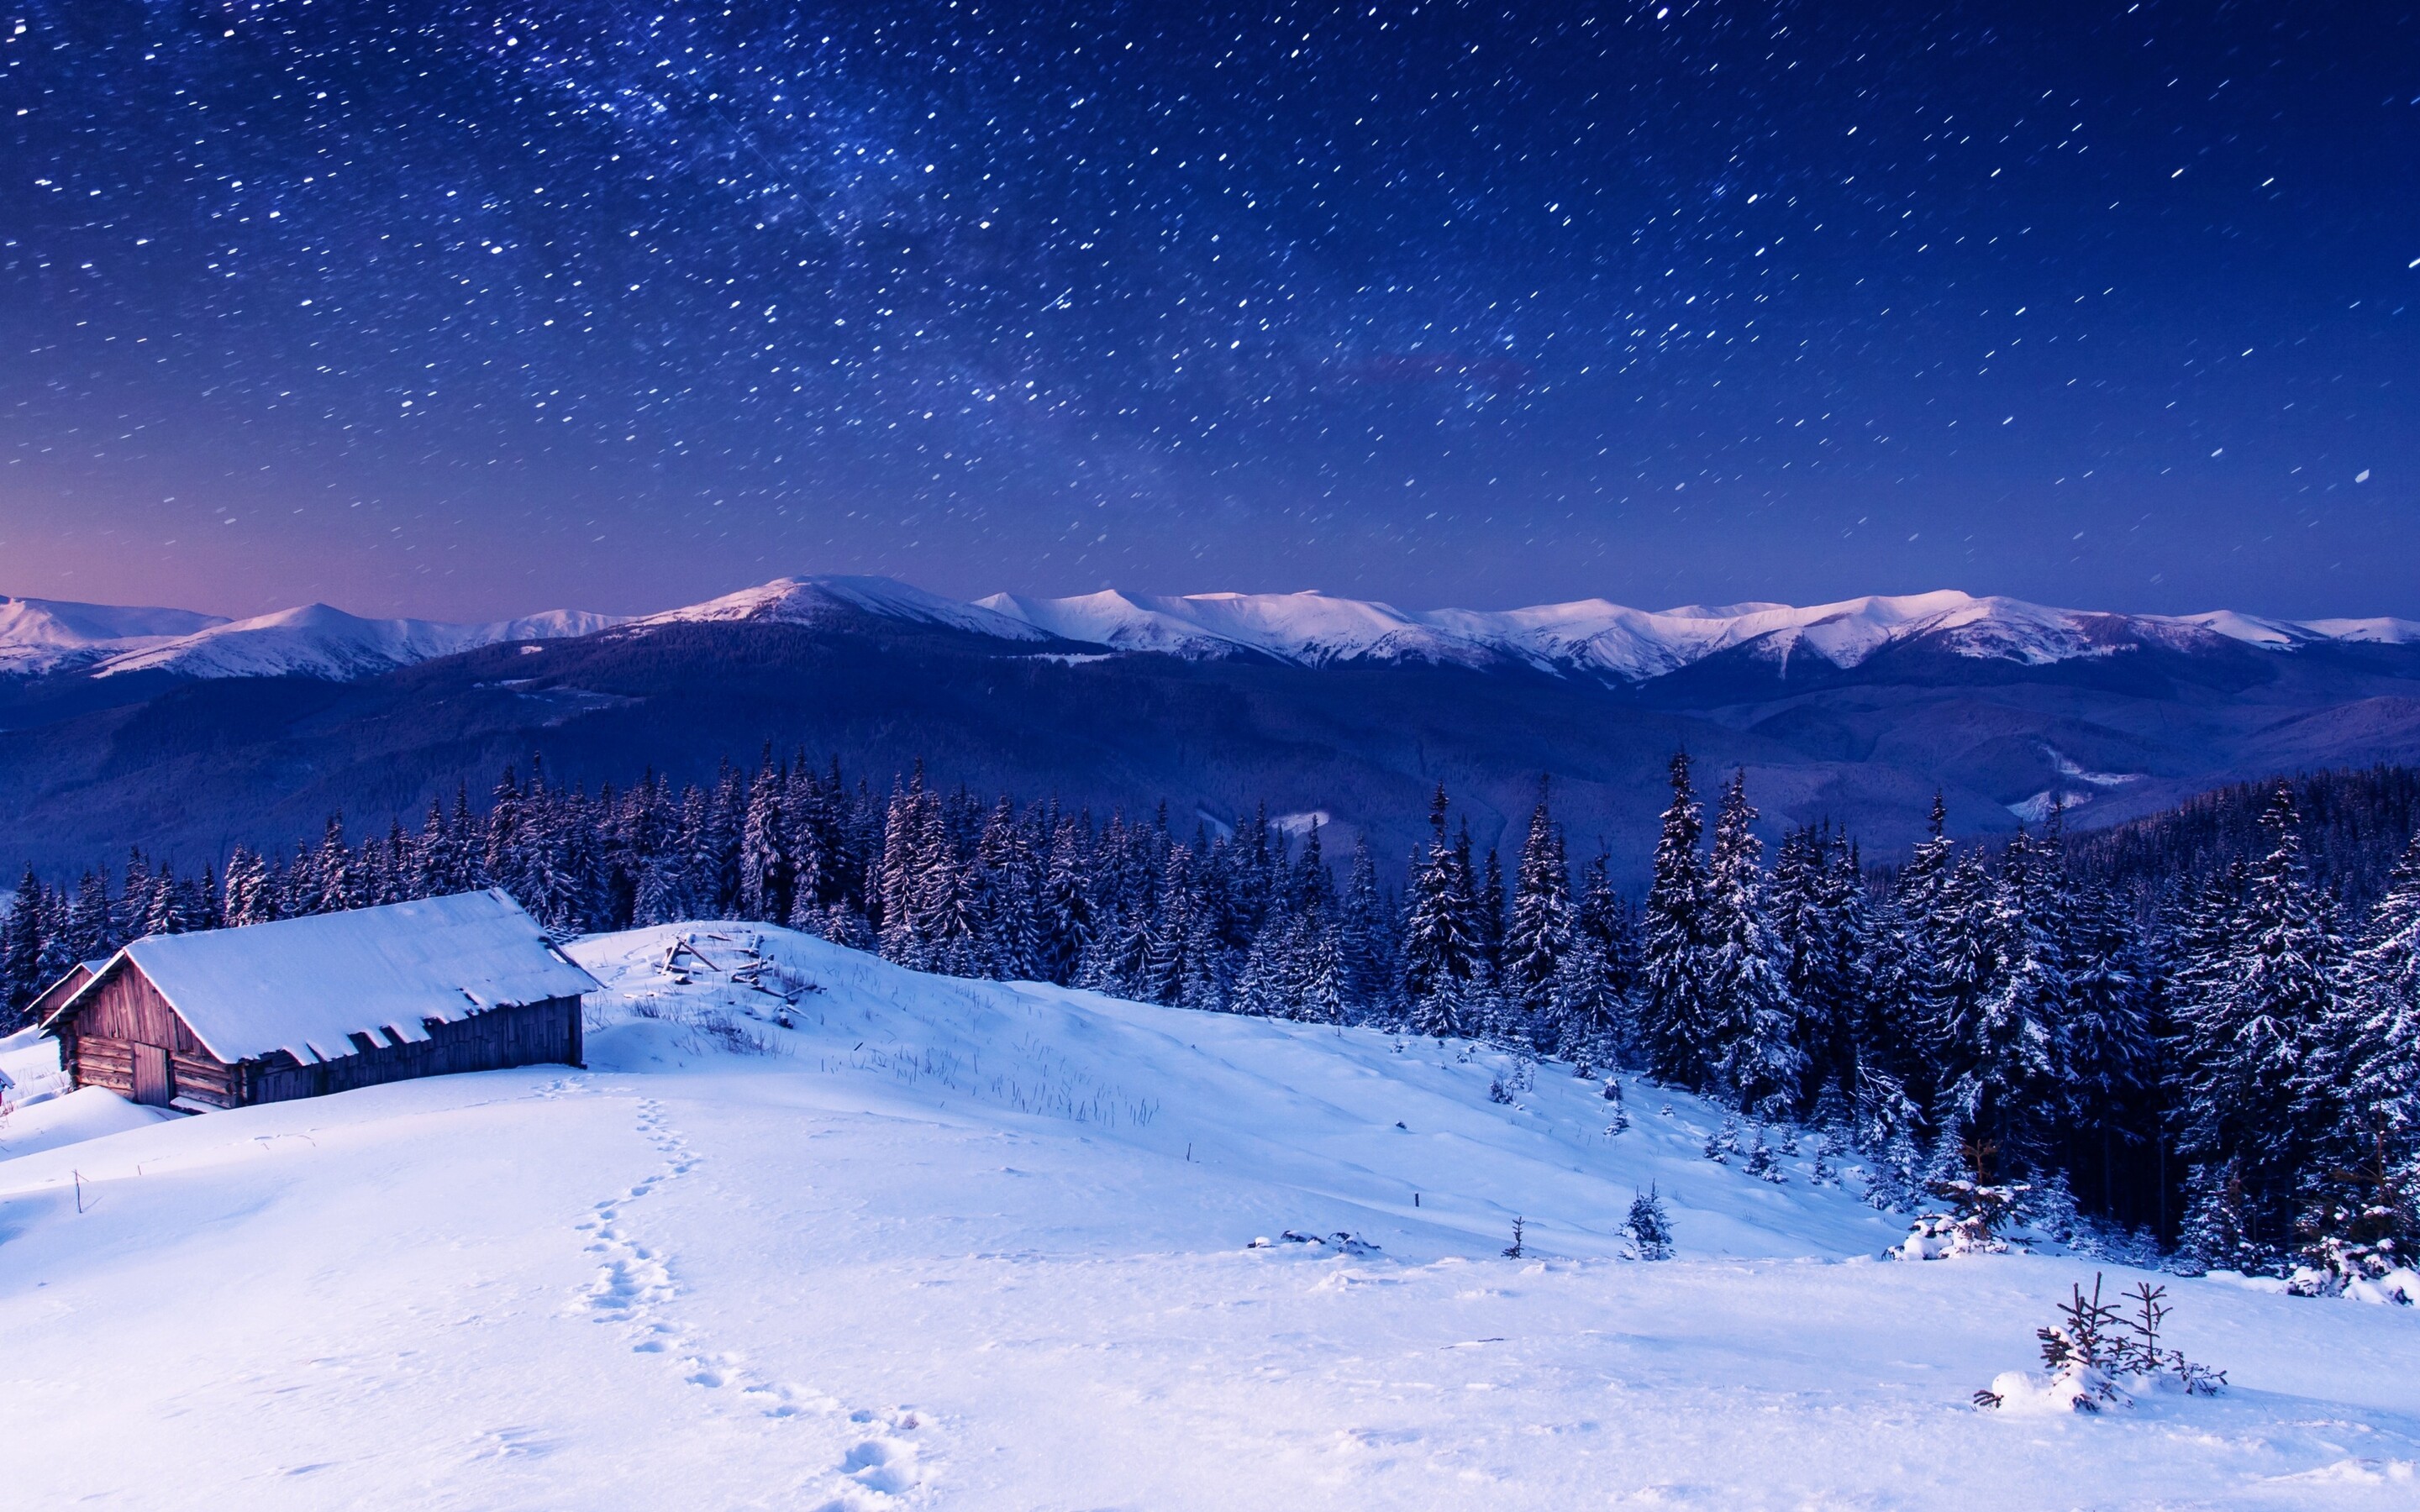 Sky Winter Stars Mountains 4k Macbook Pro Retina HD 4k Wallpaper, Image, Background, Photo and Picture